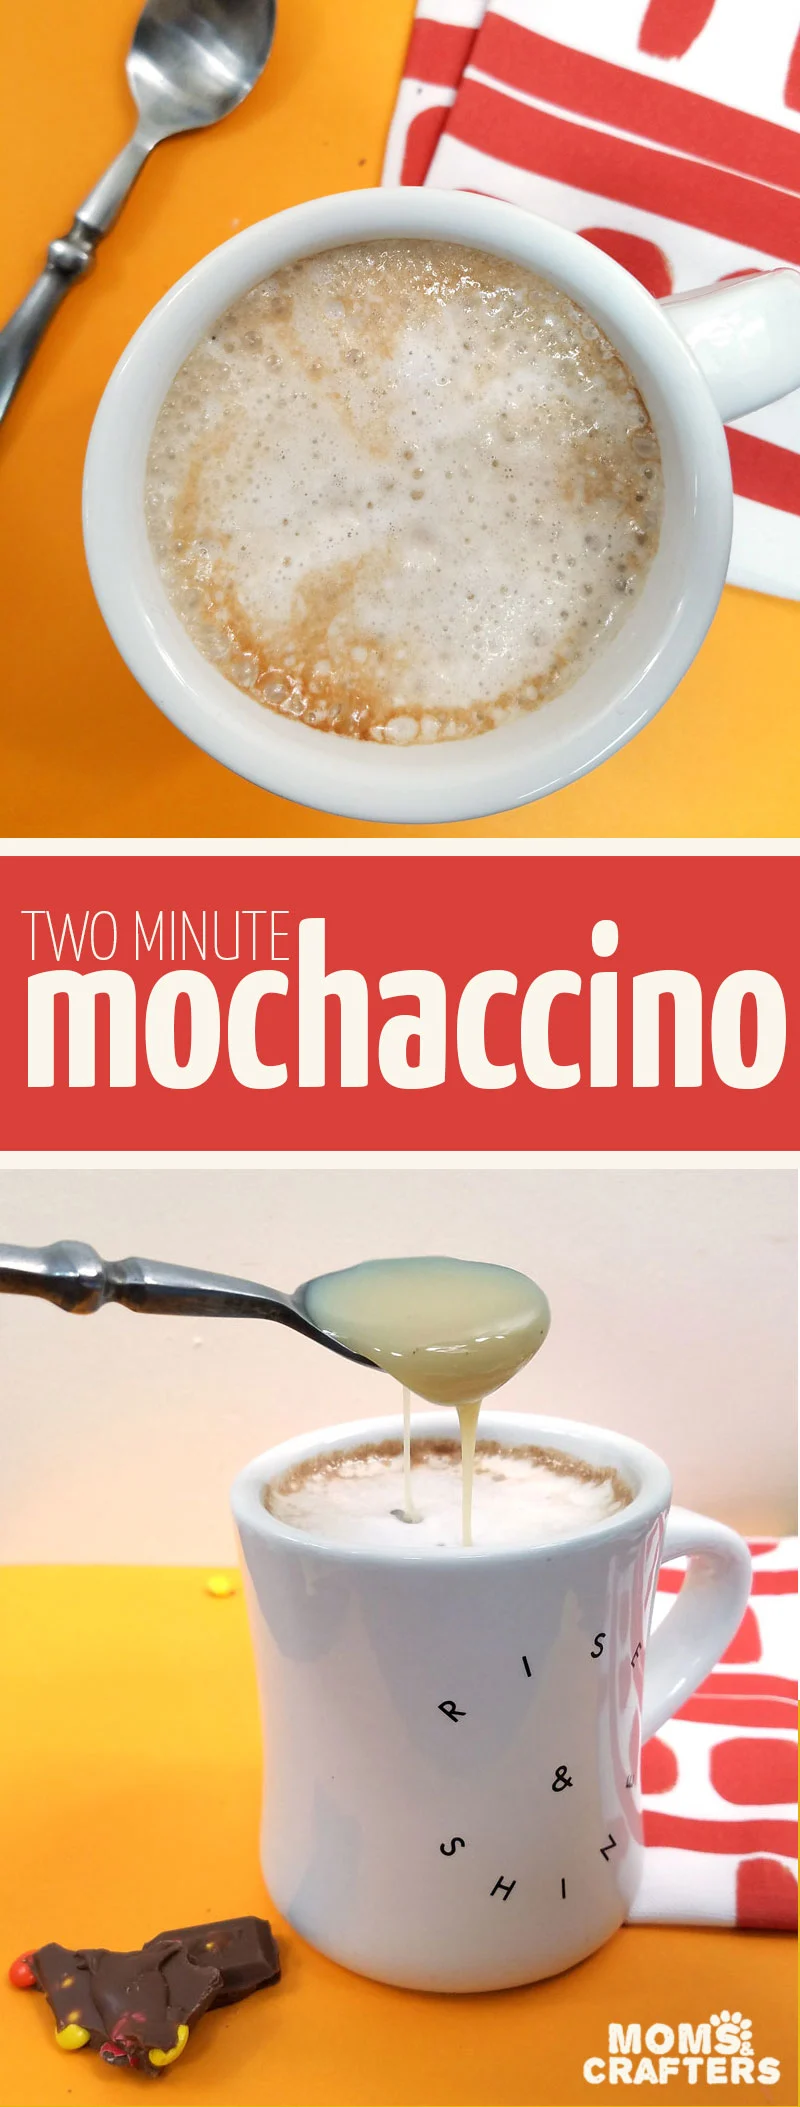 Whether you're looking for a heavenly Mother's Day breakfast idea, or just the occasional calorie splurge, this two minute mochaccino recipe is a delicious mochaccino latte and one of my favorite coffee recipes ever - caffiene included! #coffee #latte #momsandcrafters